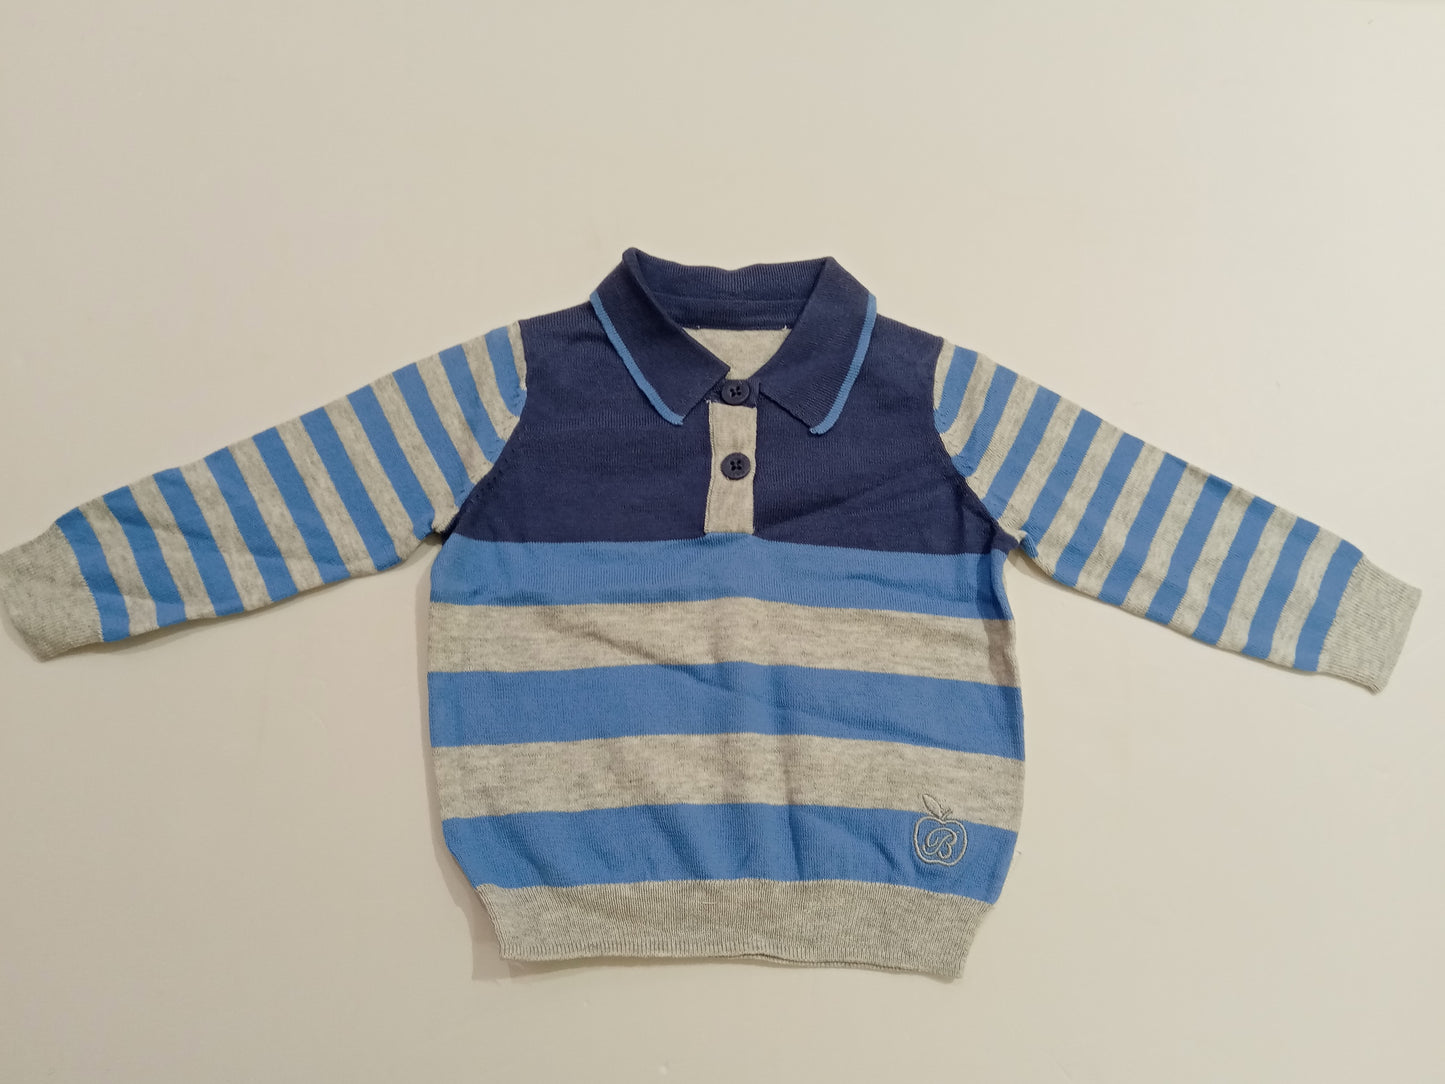 SWEATER - BABY - BLUE - AXEL